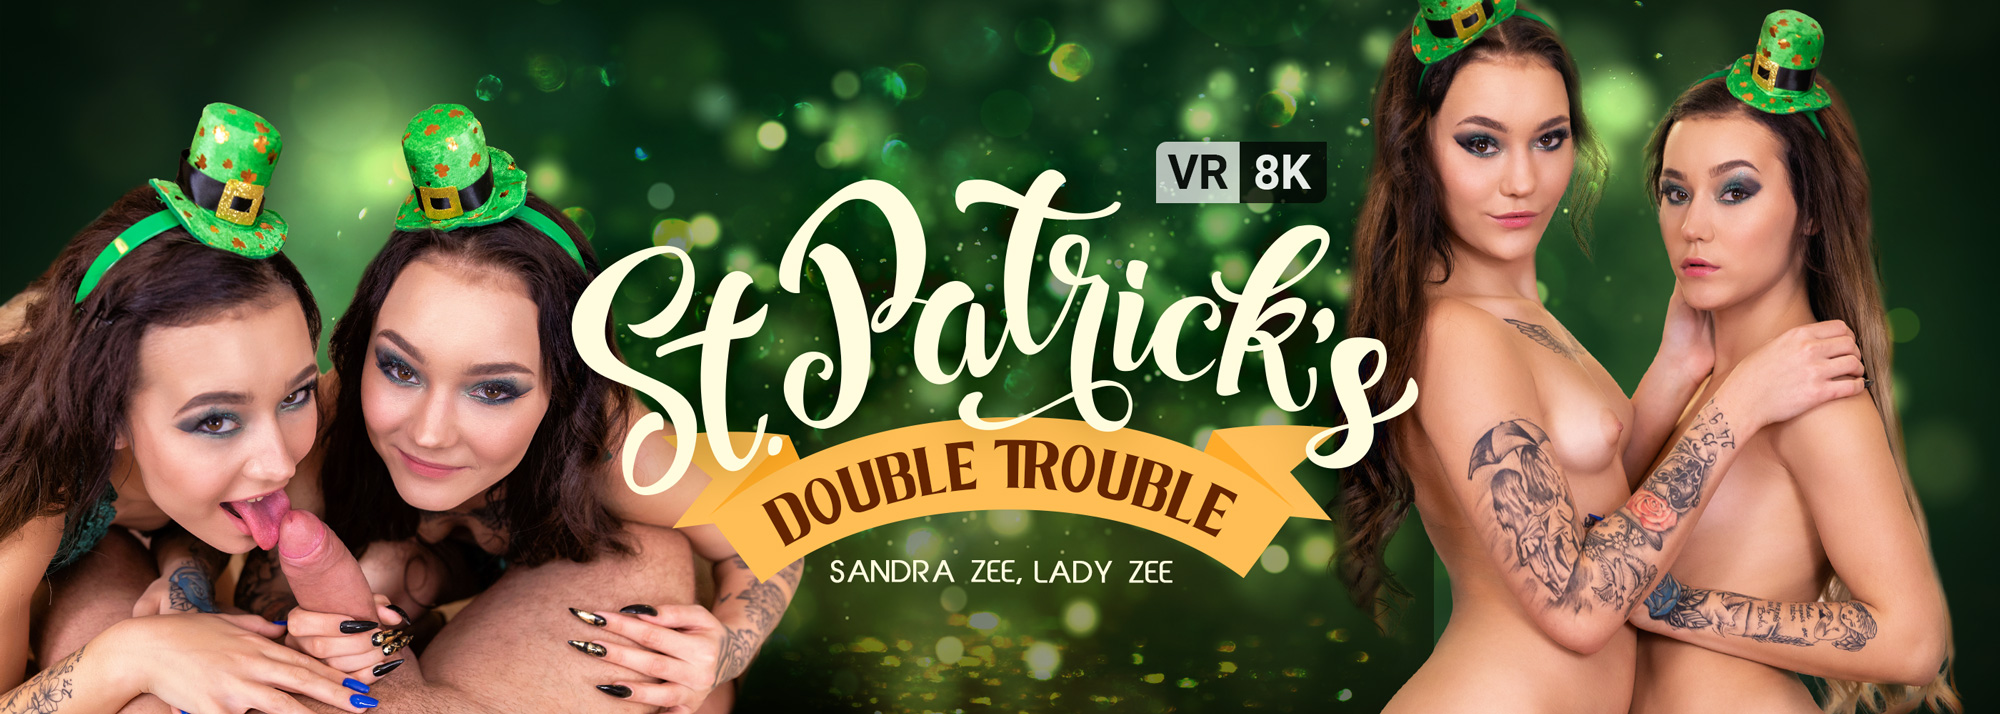 St. Patrick's Double Trouble with Lady Zee  Slideshow